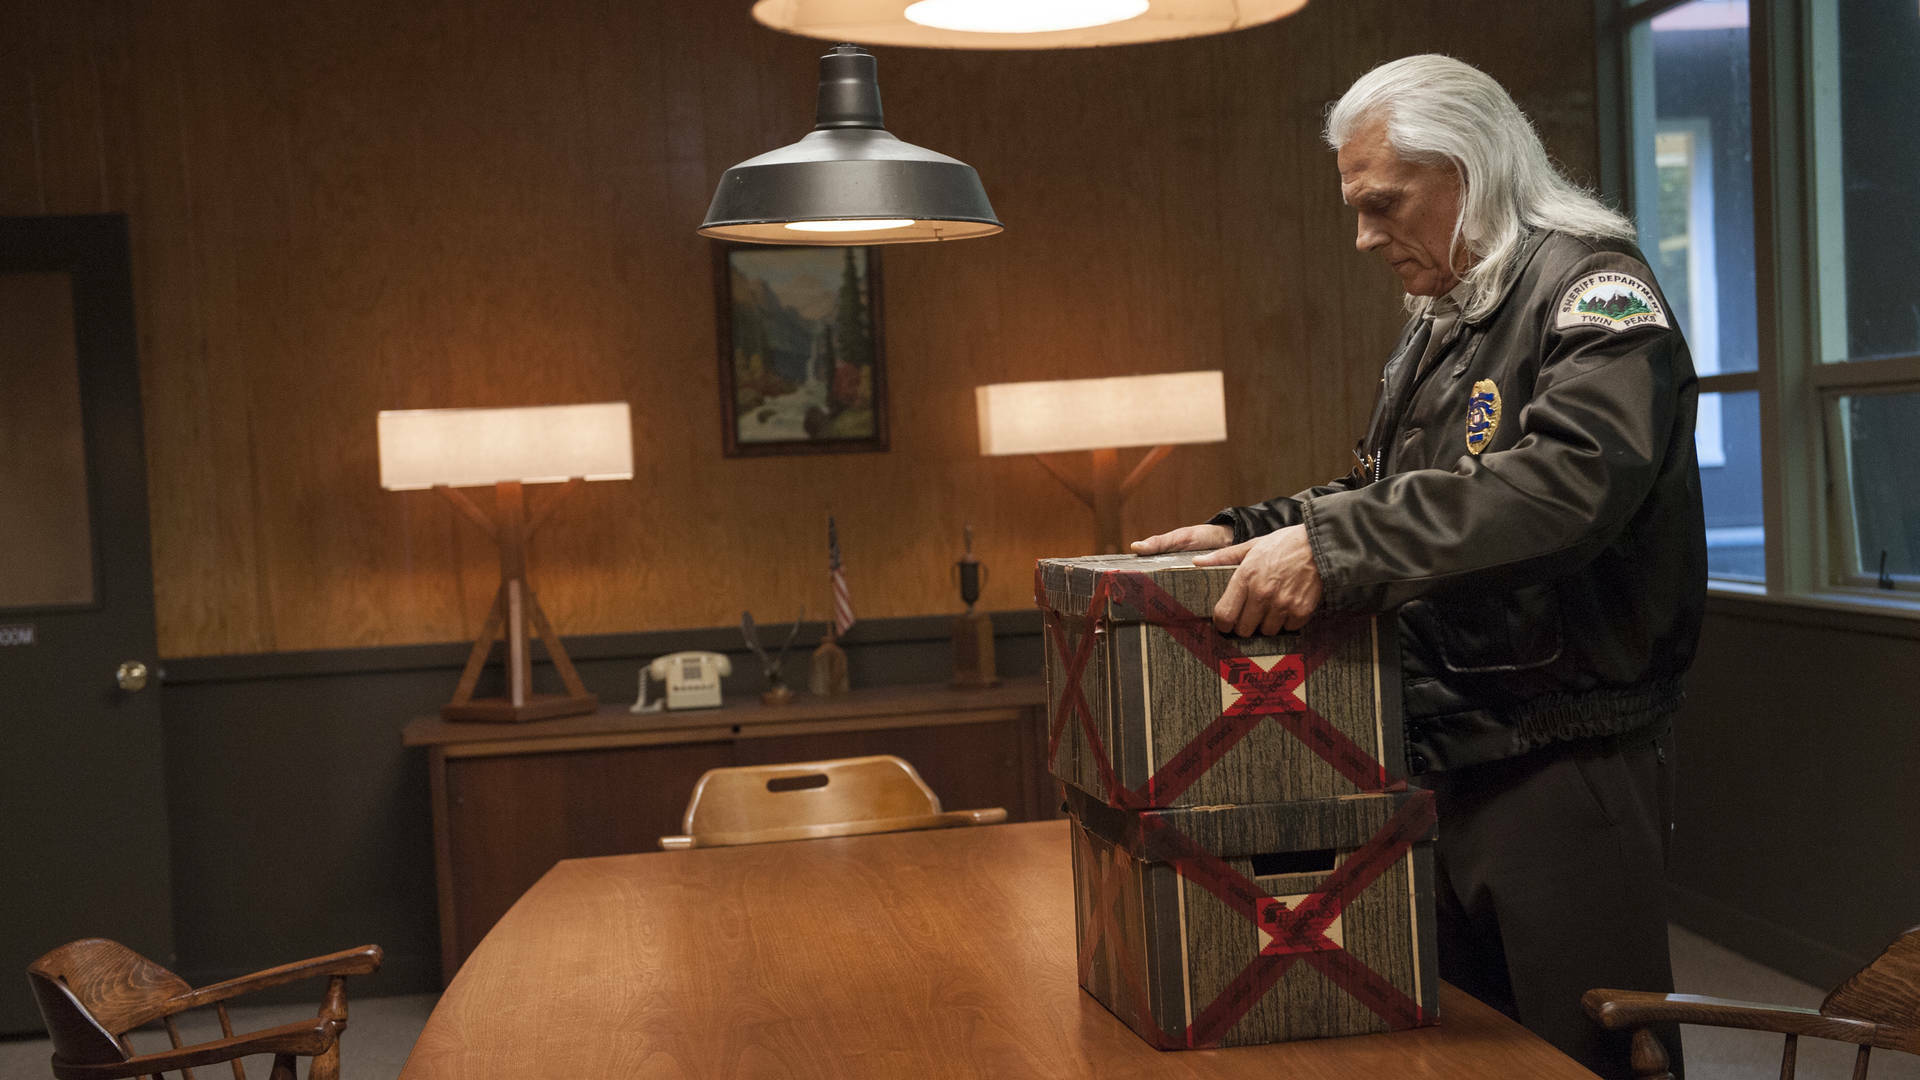 Watch Twin Peaks: The Return Streaming Online - Try for Free